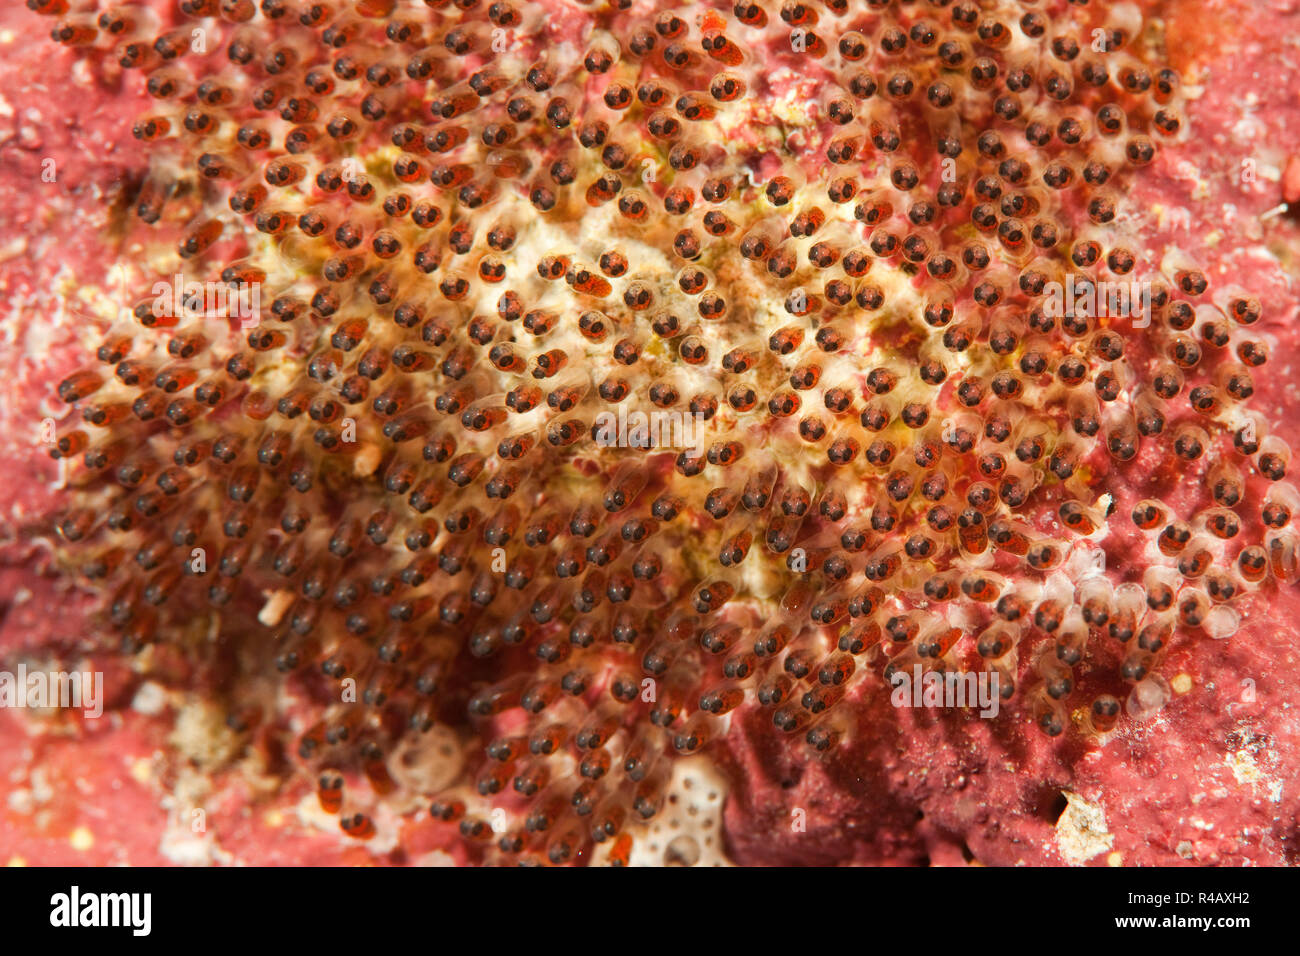 Clark's anemone fish, eggs, Pacific, Yap, FSM, Federated States of Micronesia, Oceania, (Amphiprion clarkii) Stock Photo